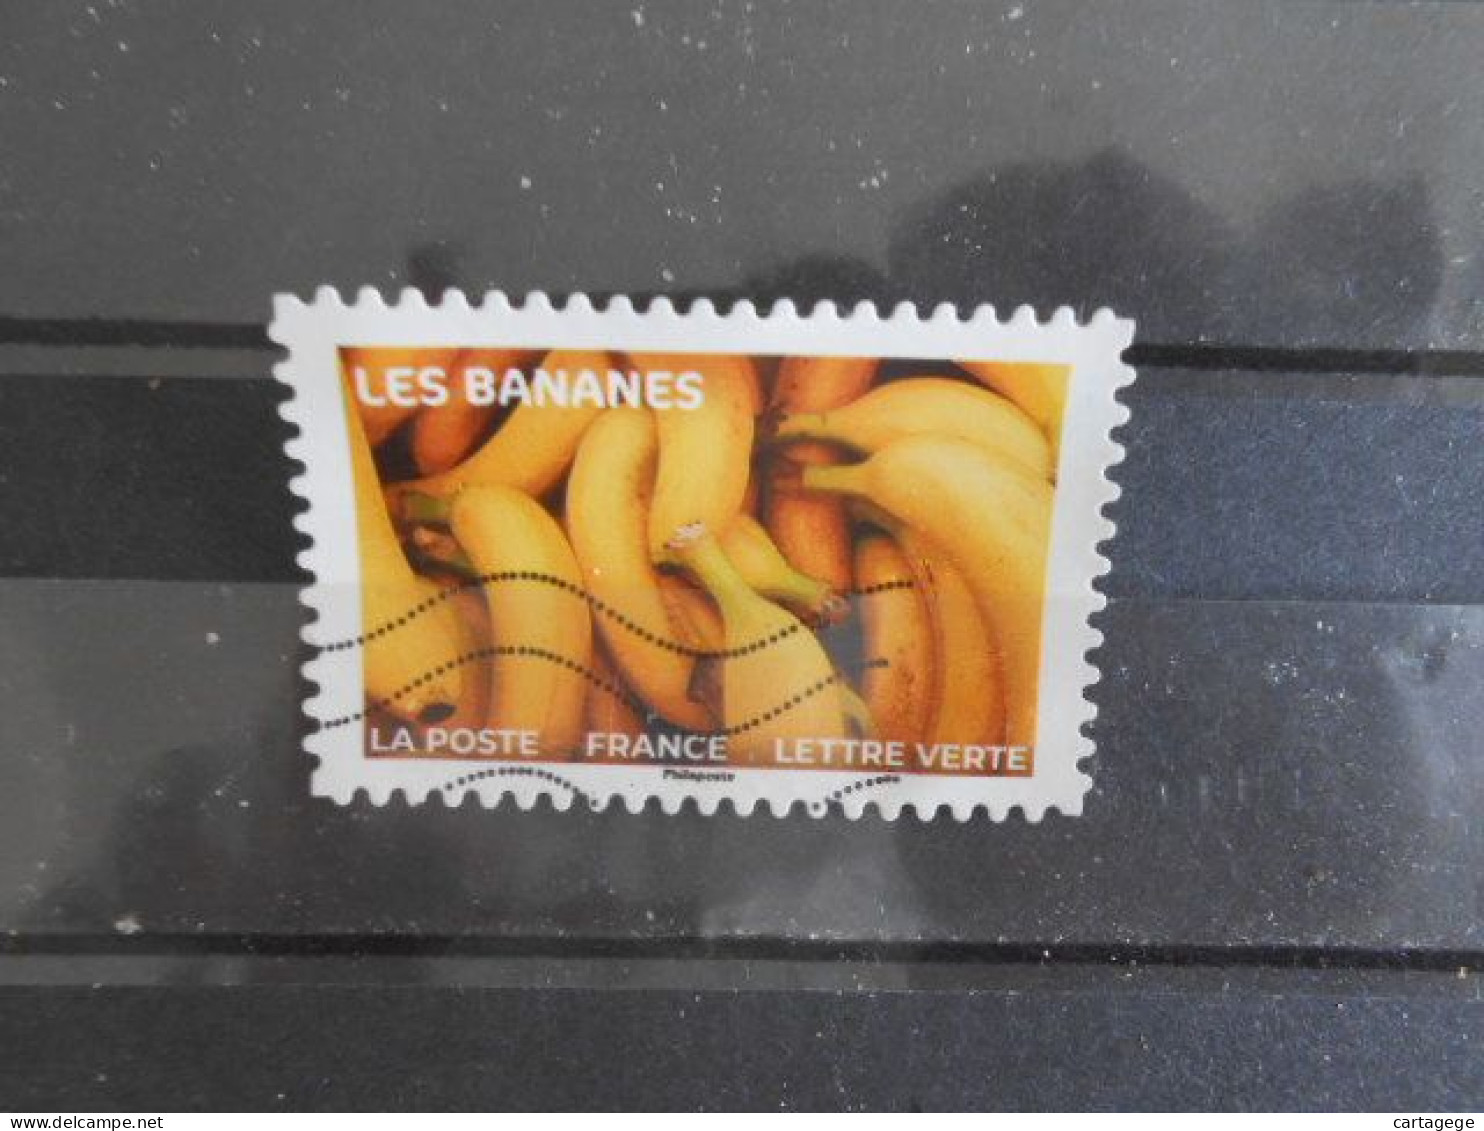 FRANCE YT A 2289 LES BANANES - Used Stamps